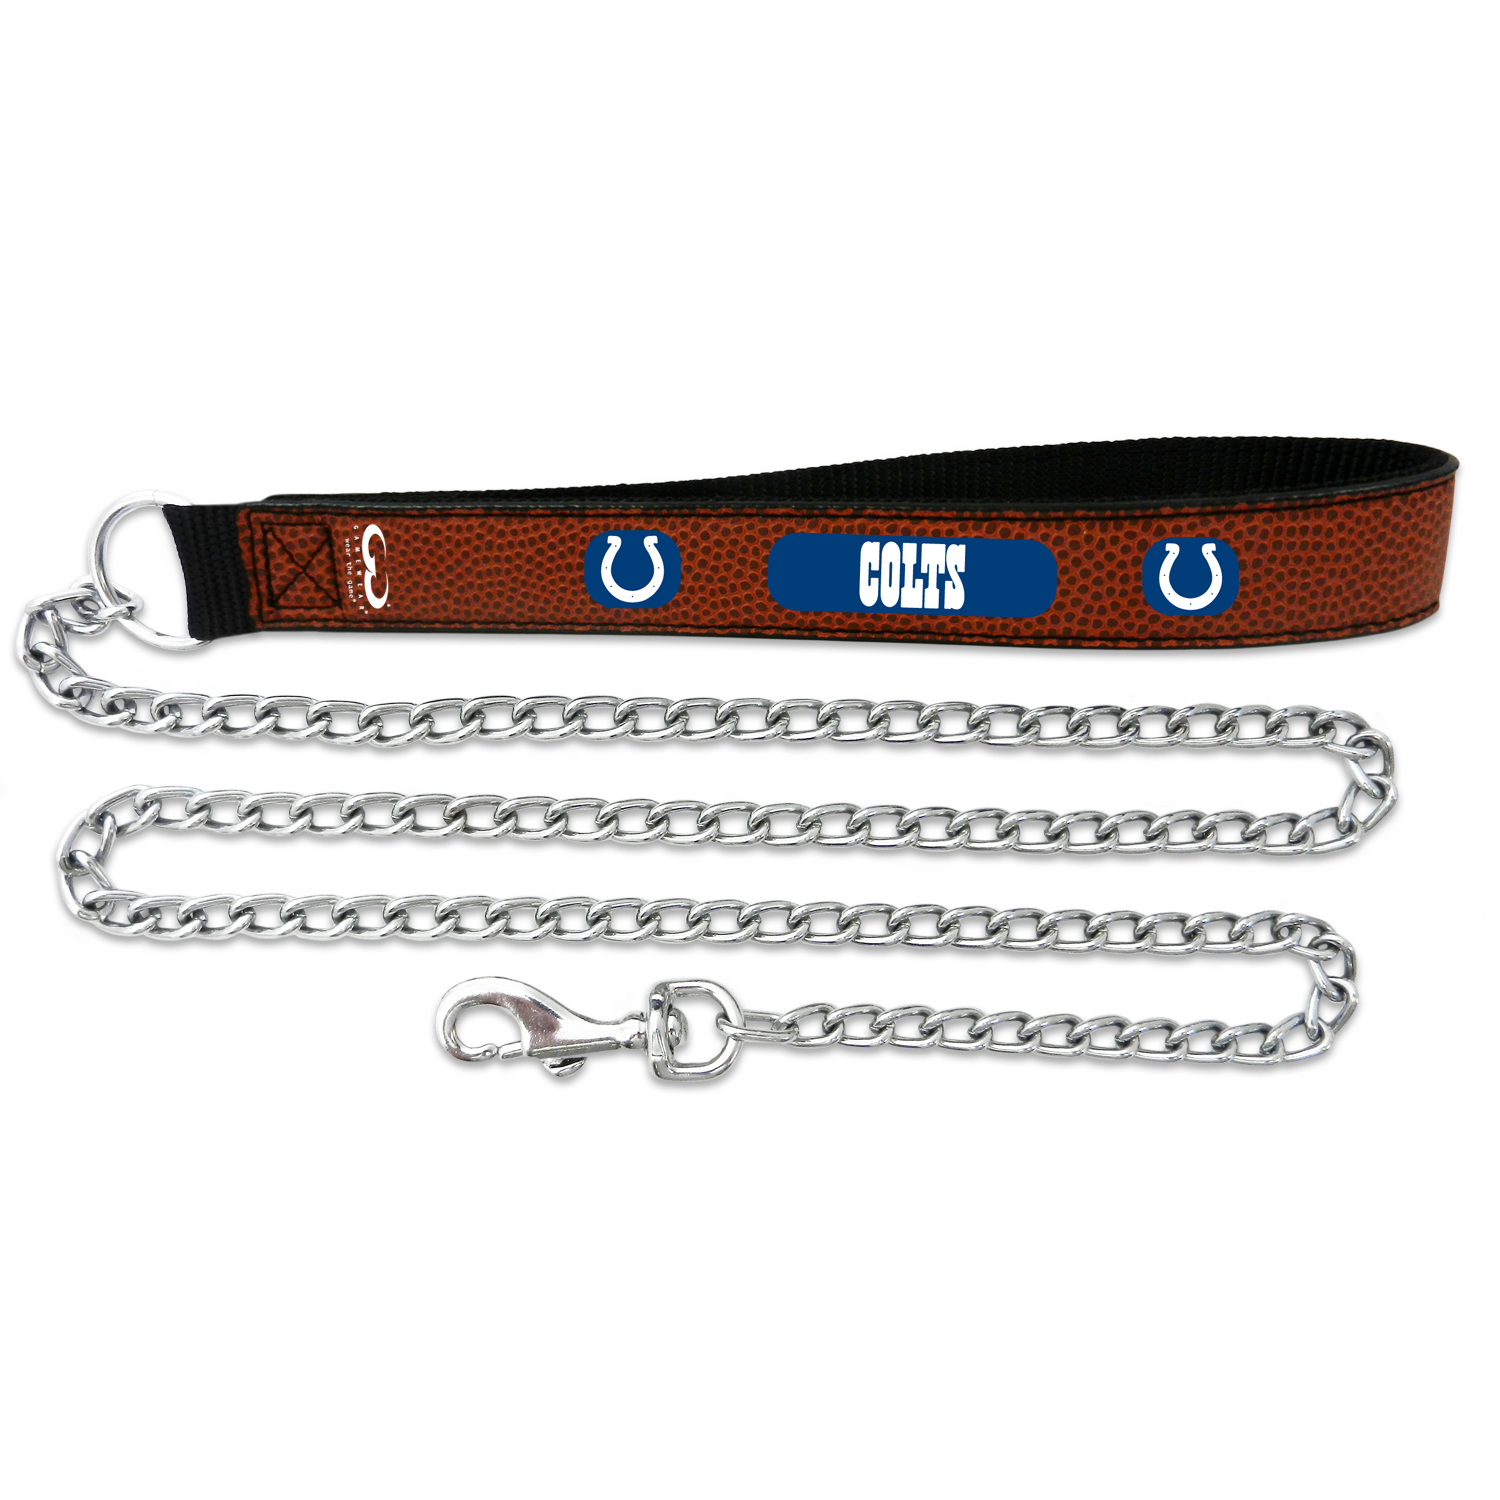 GAMEWEAR Indianapolis Colts Football Leather Chain Leash